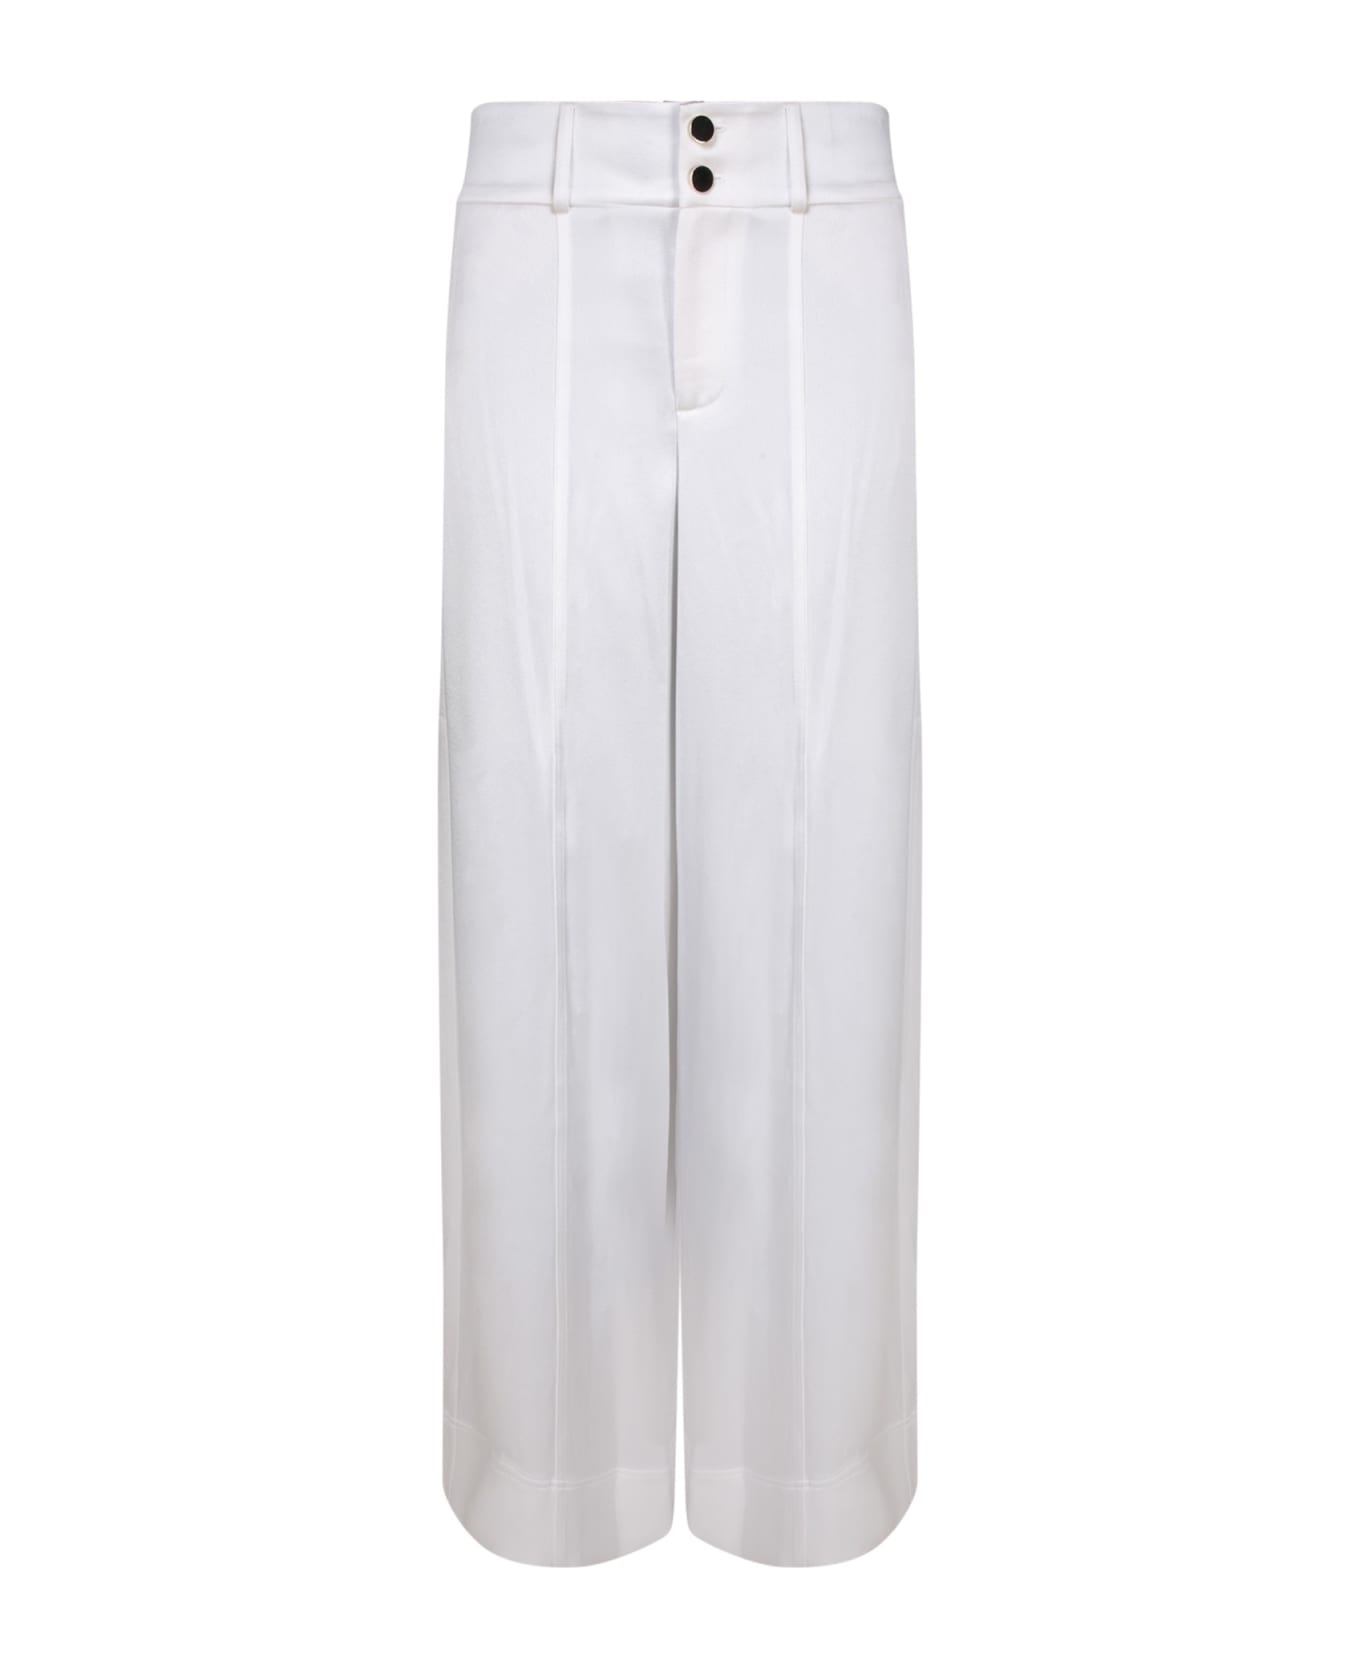 Long Sleeve Jersey Character Dress 3mths-7yrs White Wide Leg Satin Trousers - White